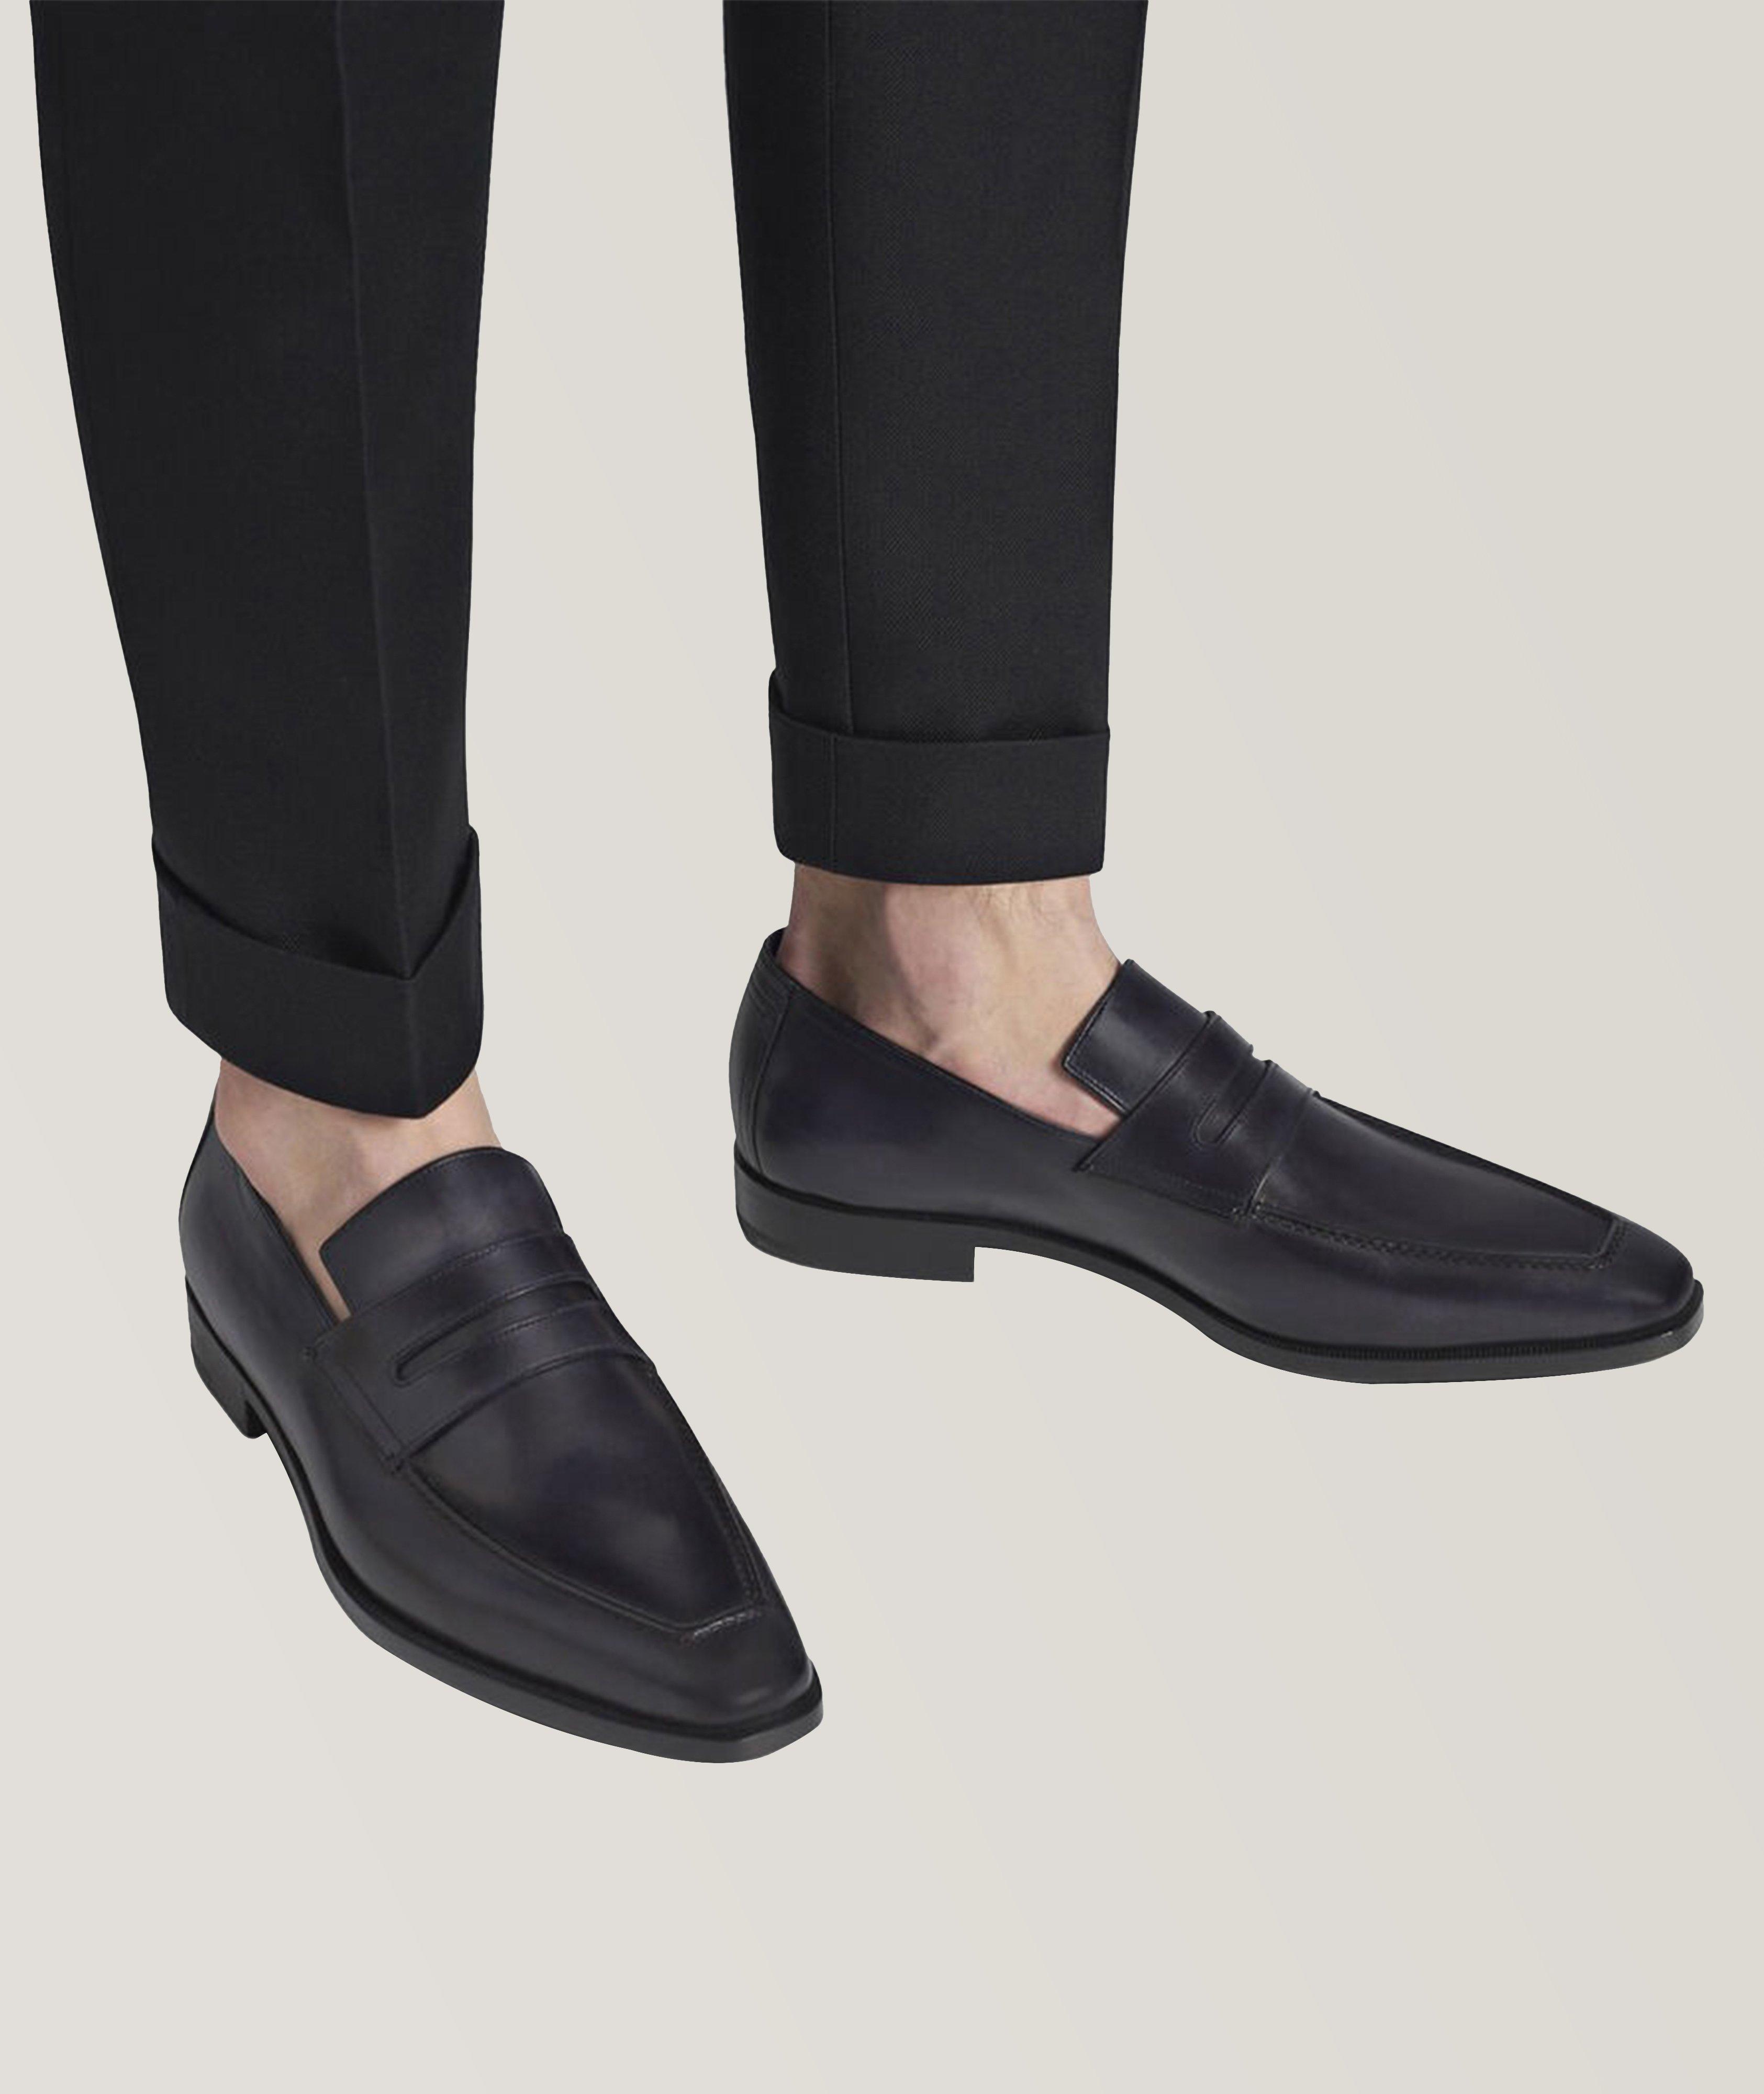 Andy Demesure Leather Loafer image 5